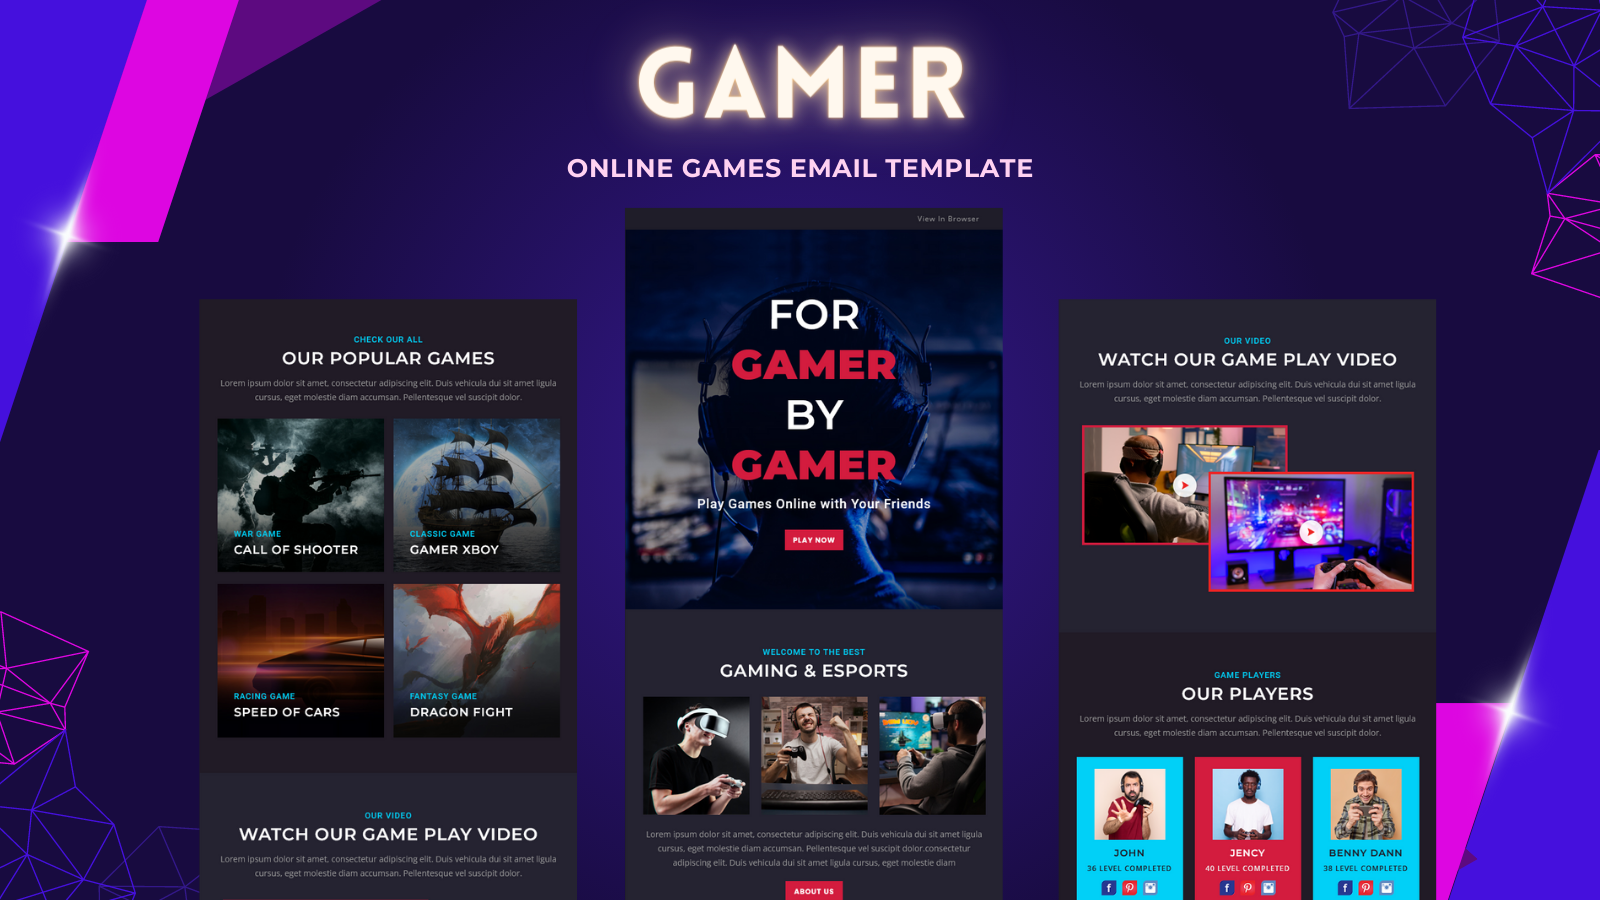 Gamer – Online Games Email Template